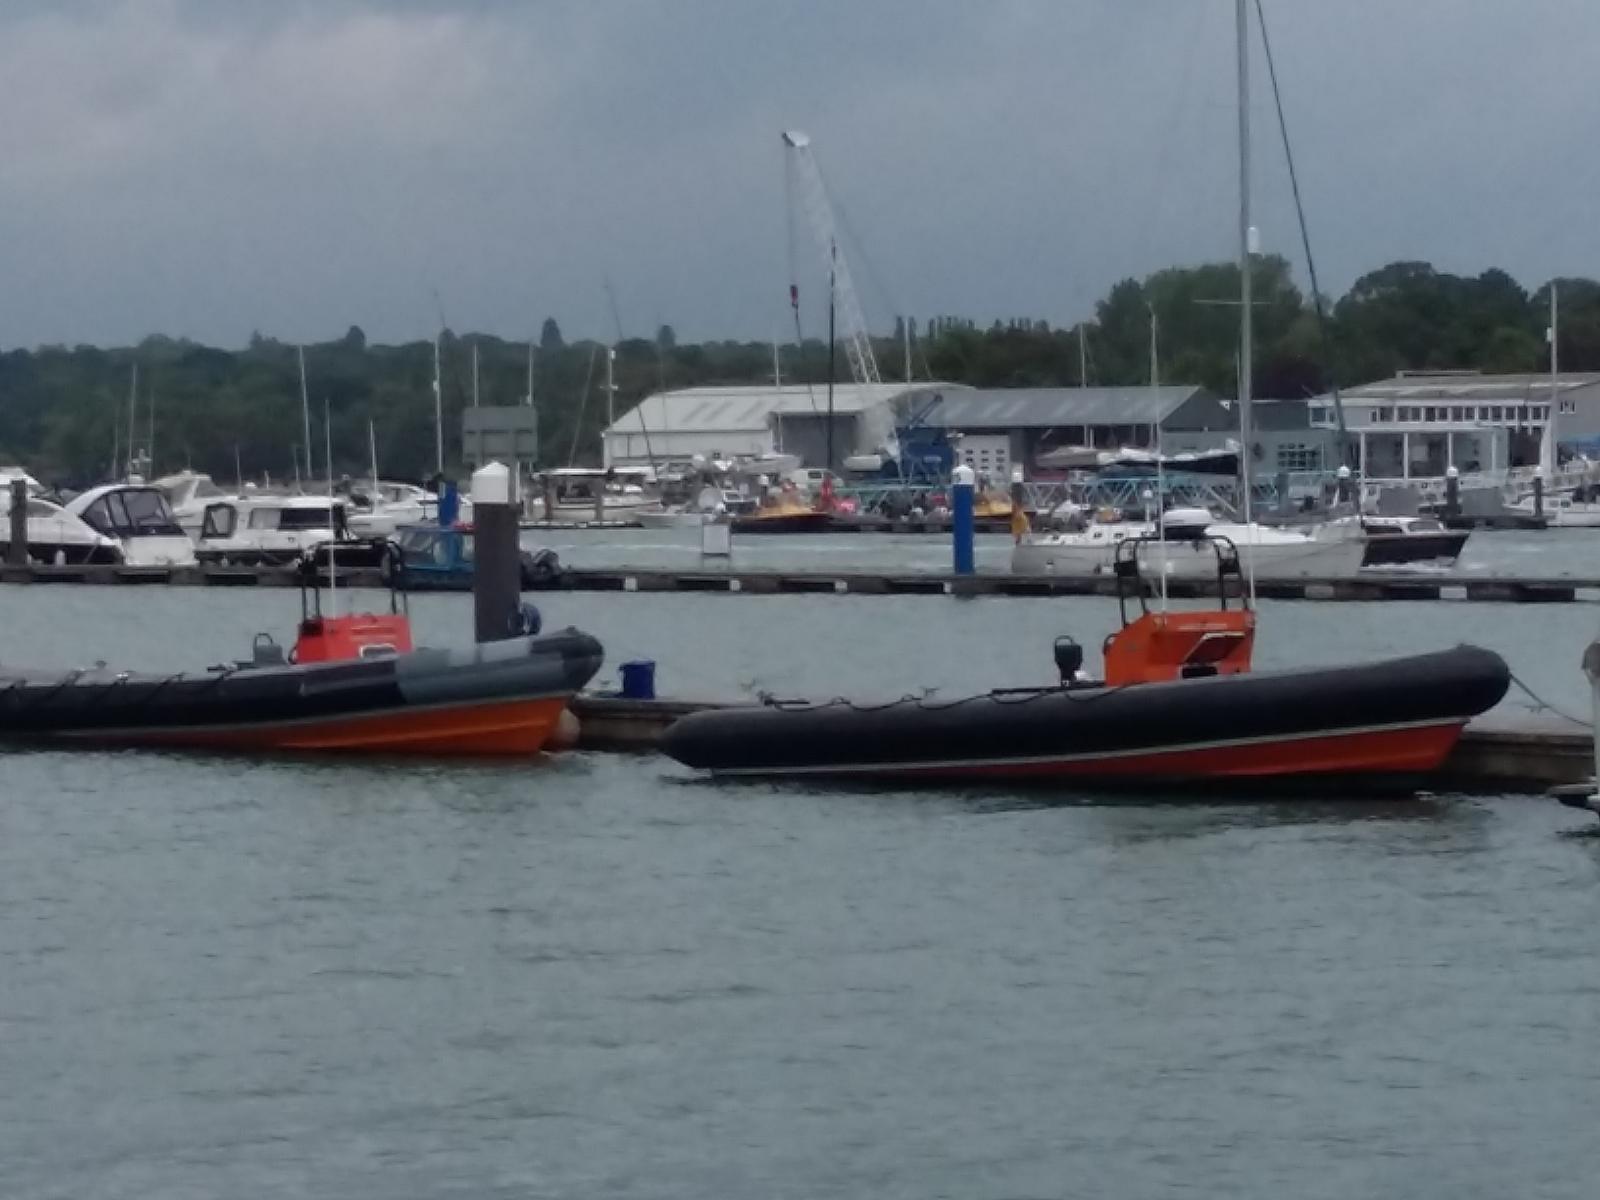 Hamble lifeboat (independent)